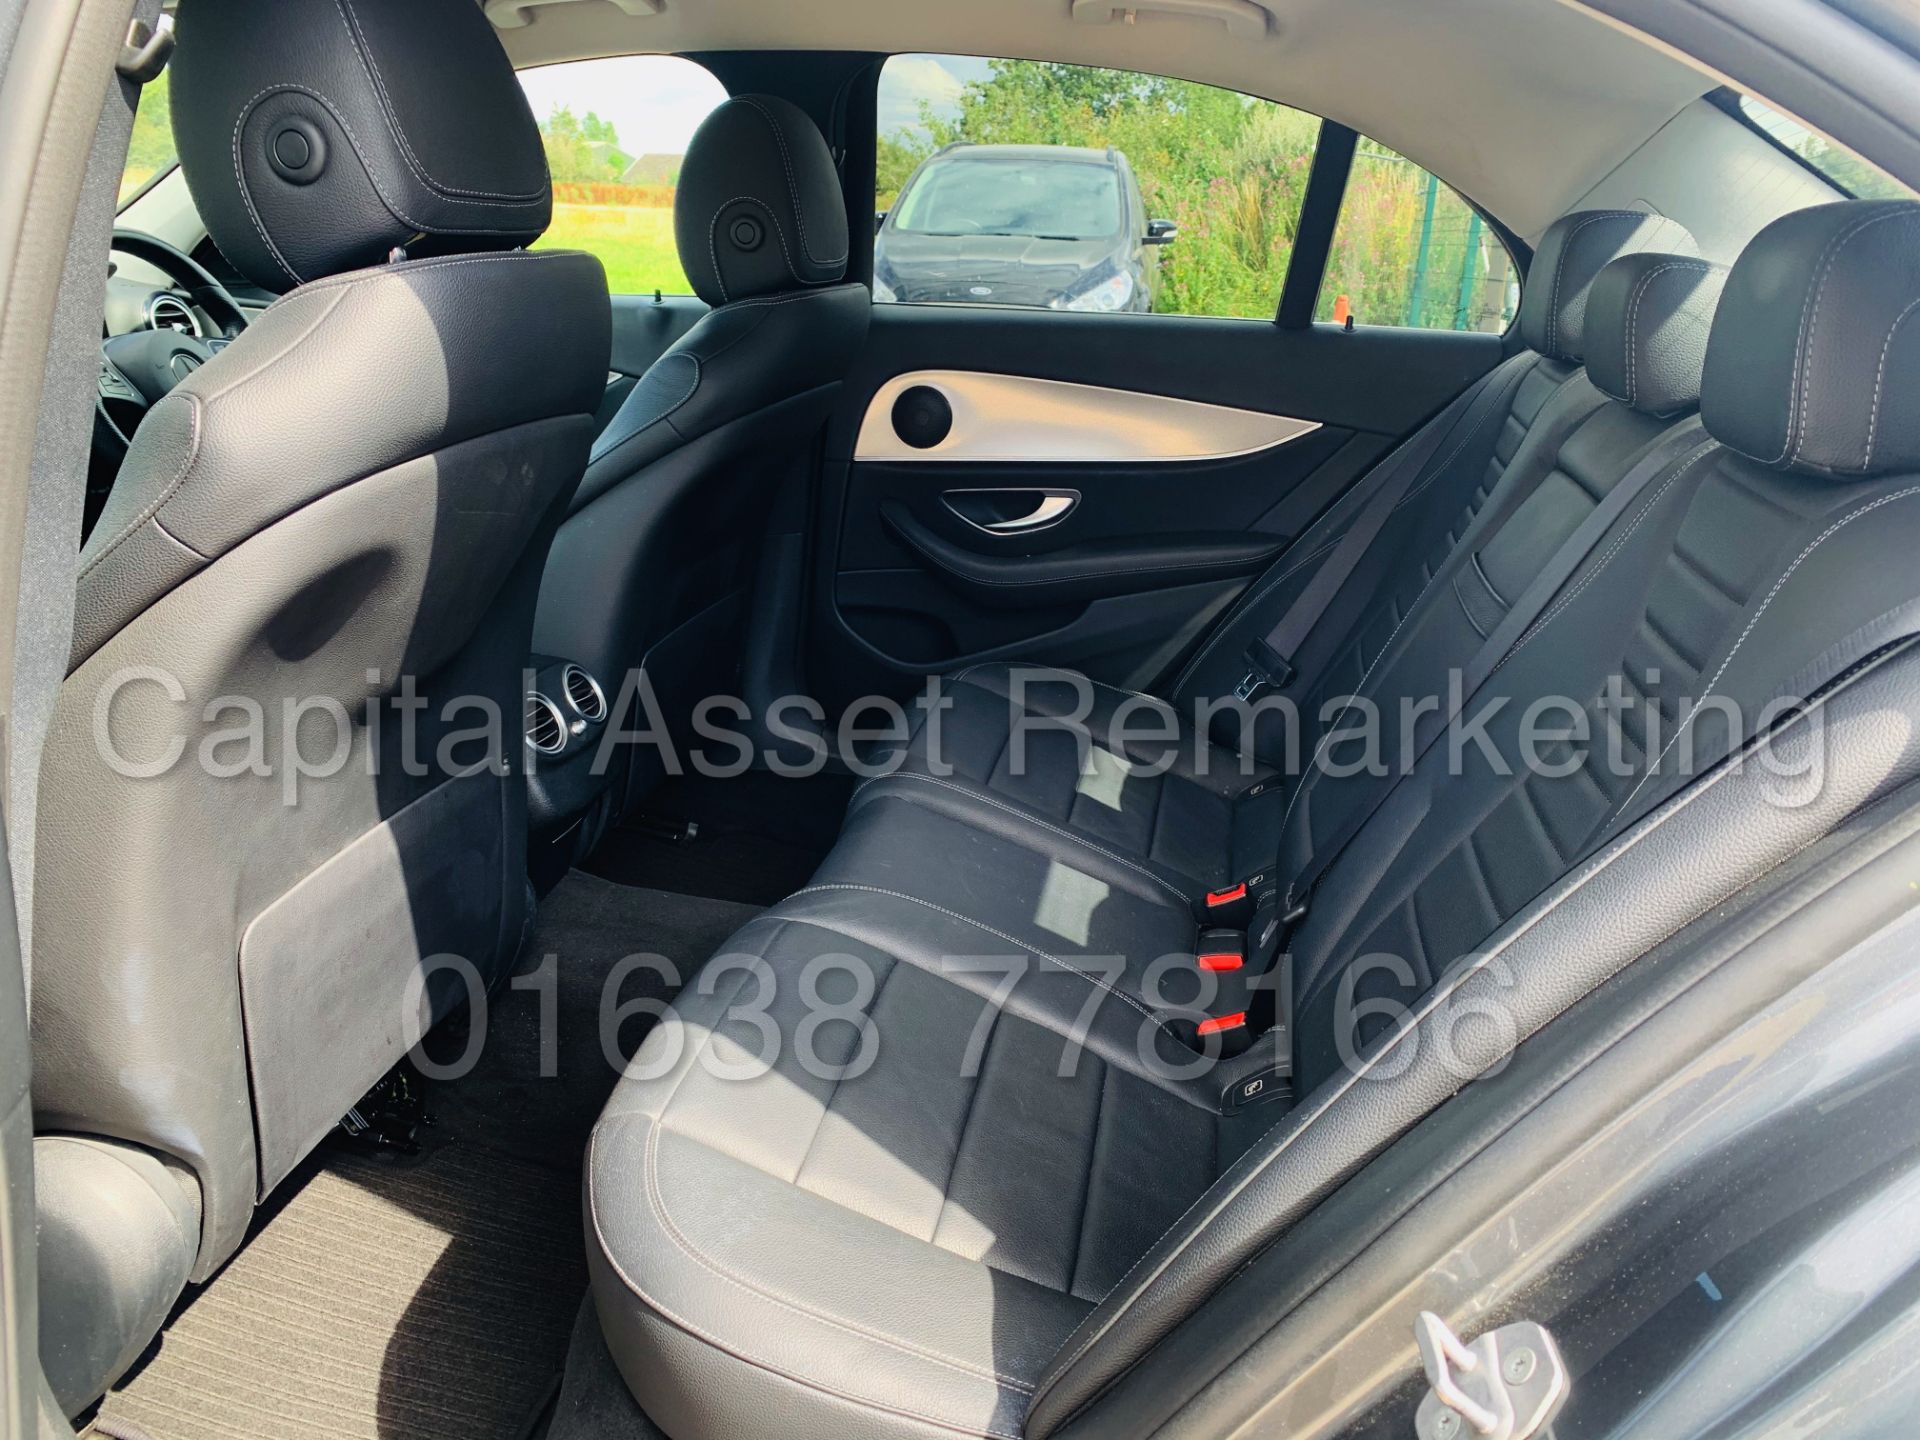 (On Sale) MERCEDES-BENZ E220D *SALOON* (2018 - NEW MODEL) '9-G TRONIC AUTO - LEATHER - SAT NAV' - Image 27 of 56